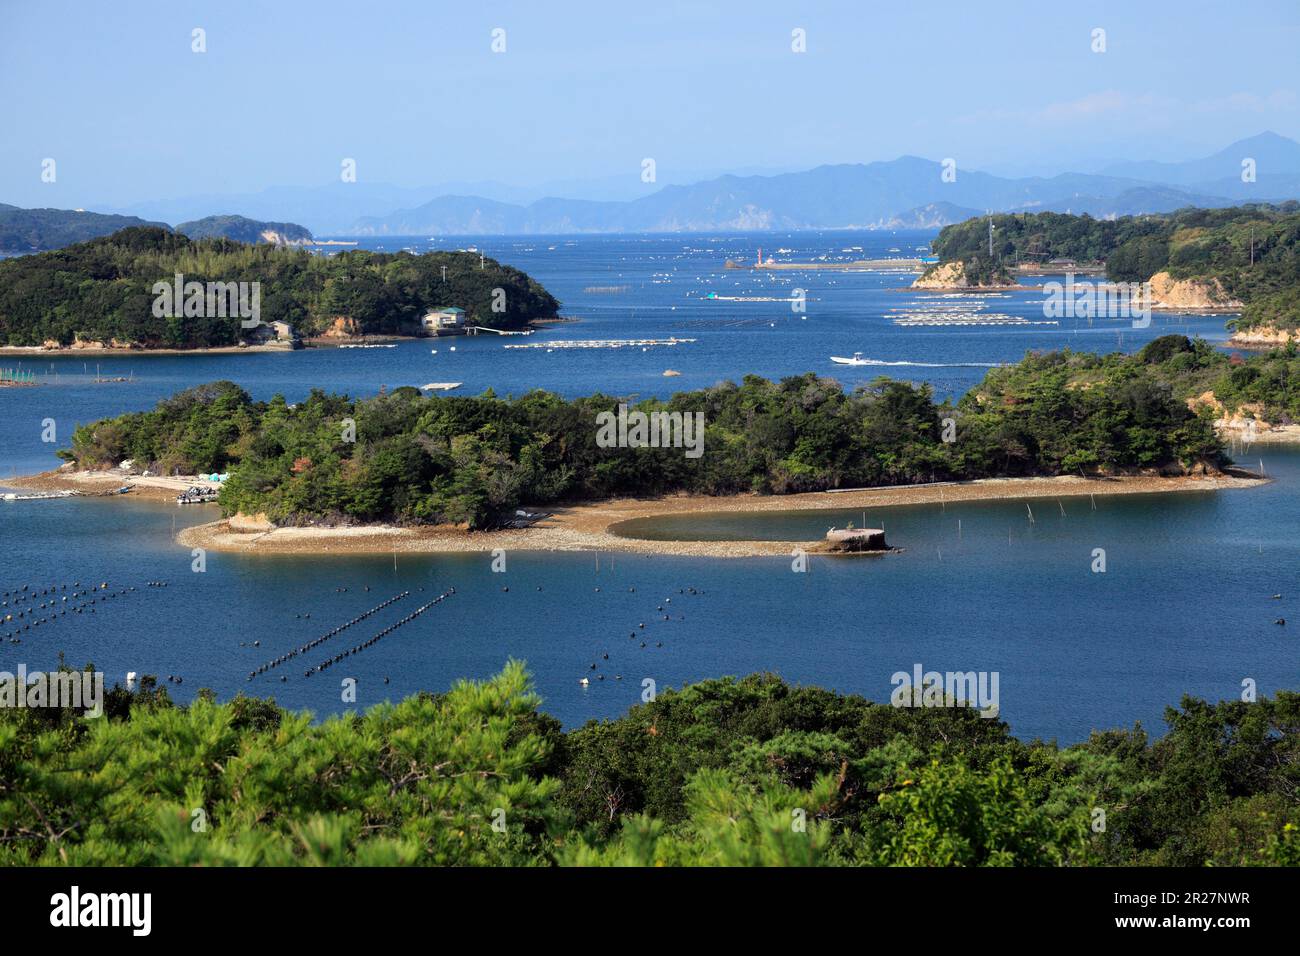 View of Agowan bay from Tomoyama observatory Stock Photo